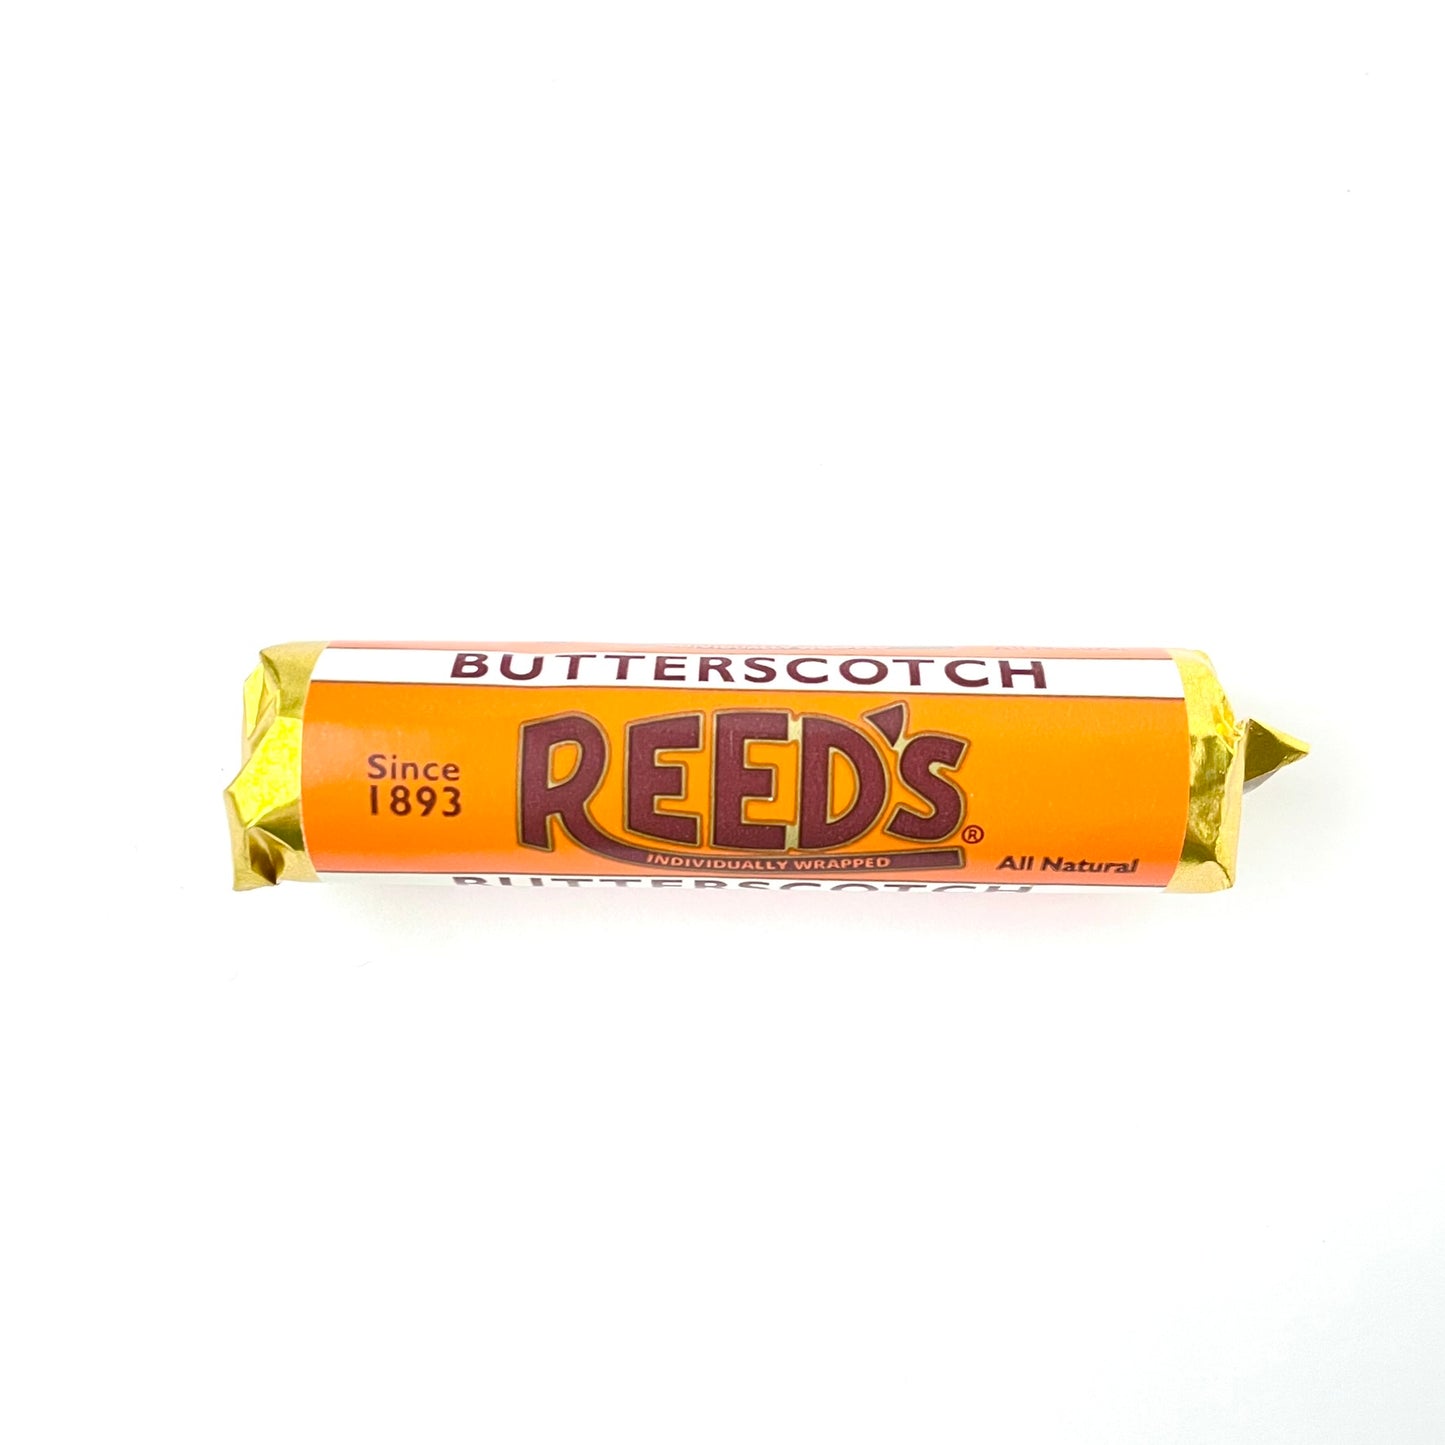 Reed's Candy Rolls - Since 1893